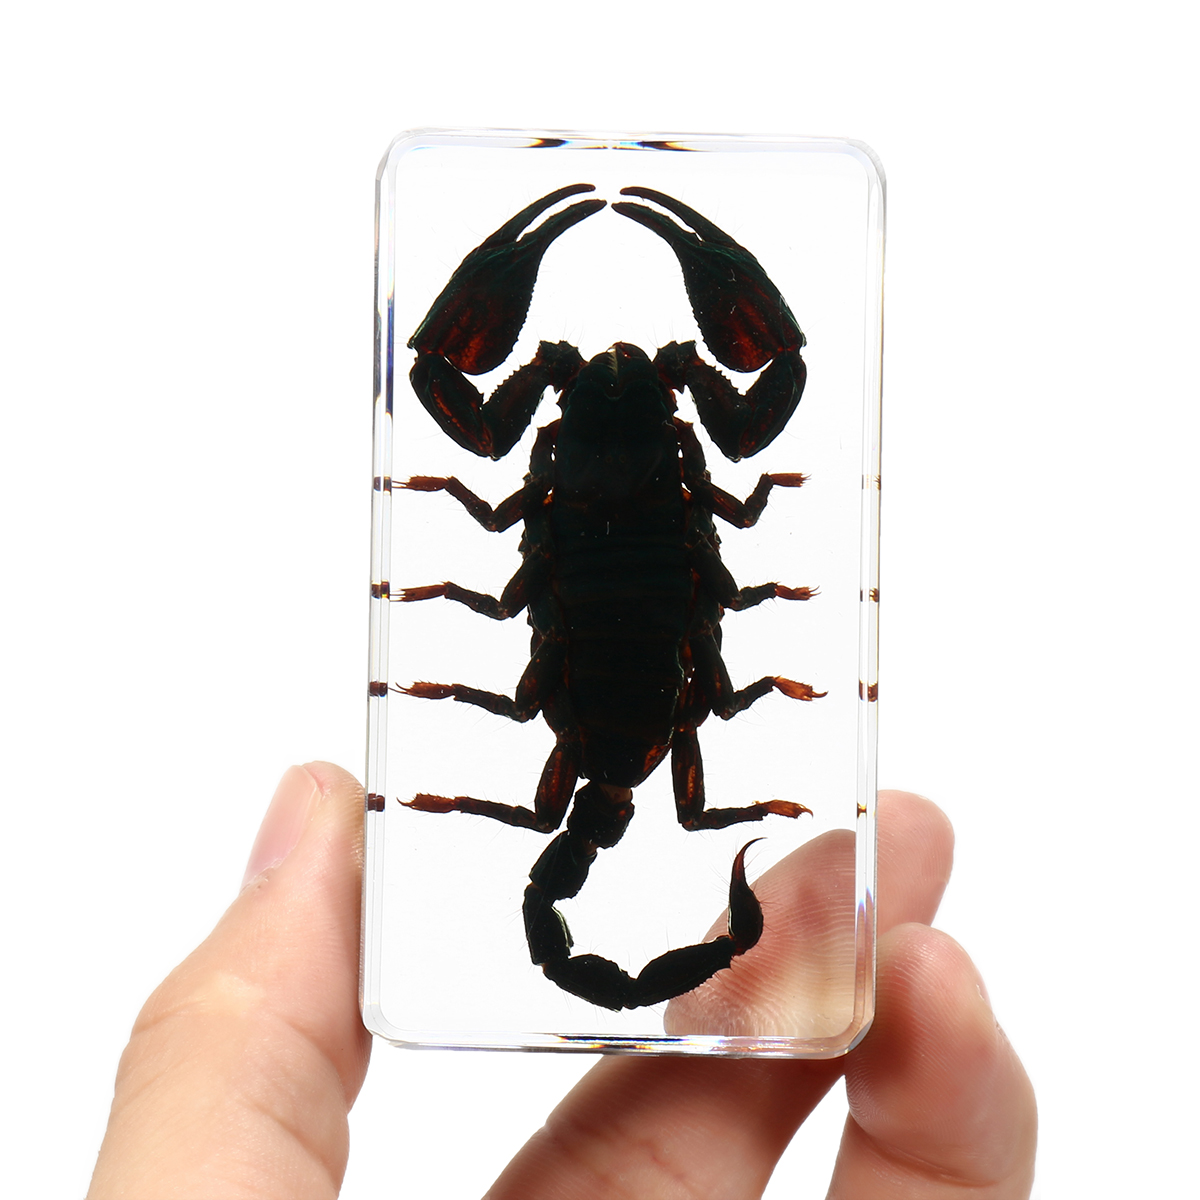 Clear-Acrylic-Lucite-Insect-Specimen-Spider-Black-Longhorn-Beetle-Scorpions-Craft-Science-Toy-1328098-3